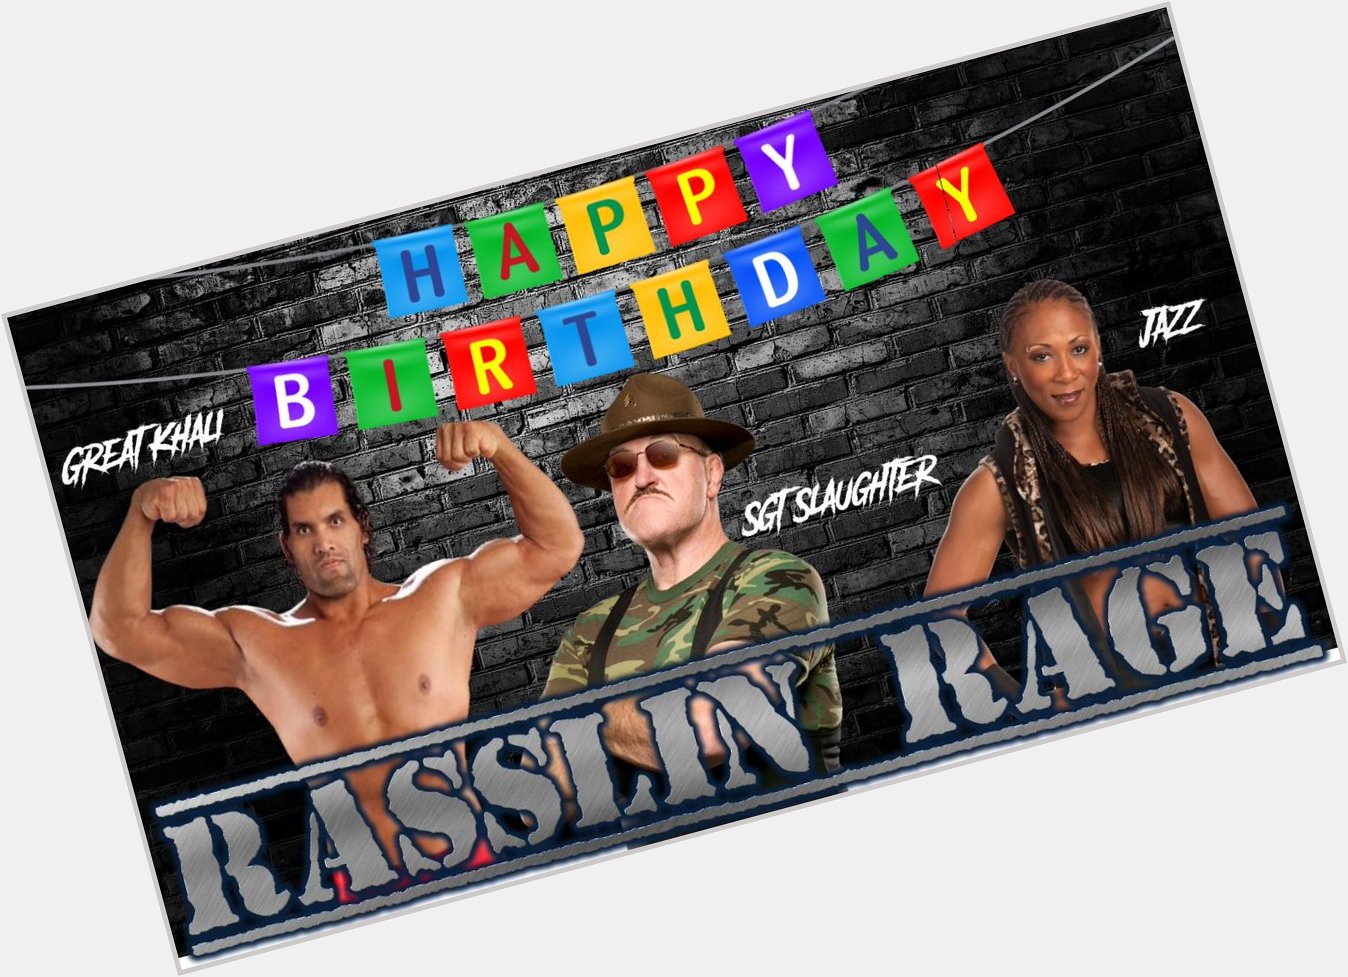 Happy Birthday to The Great Khali, Sgt. Slaughter, and Jazz!   